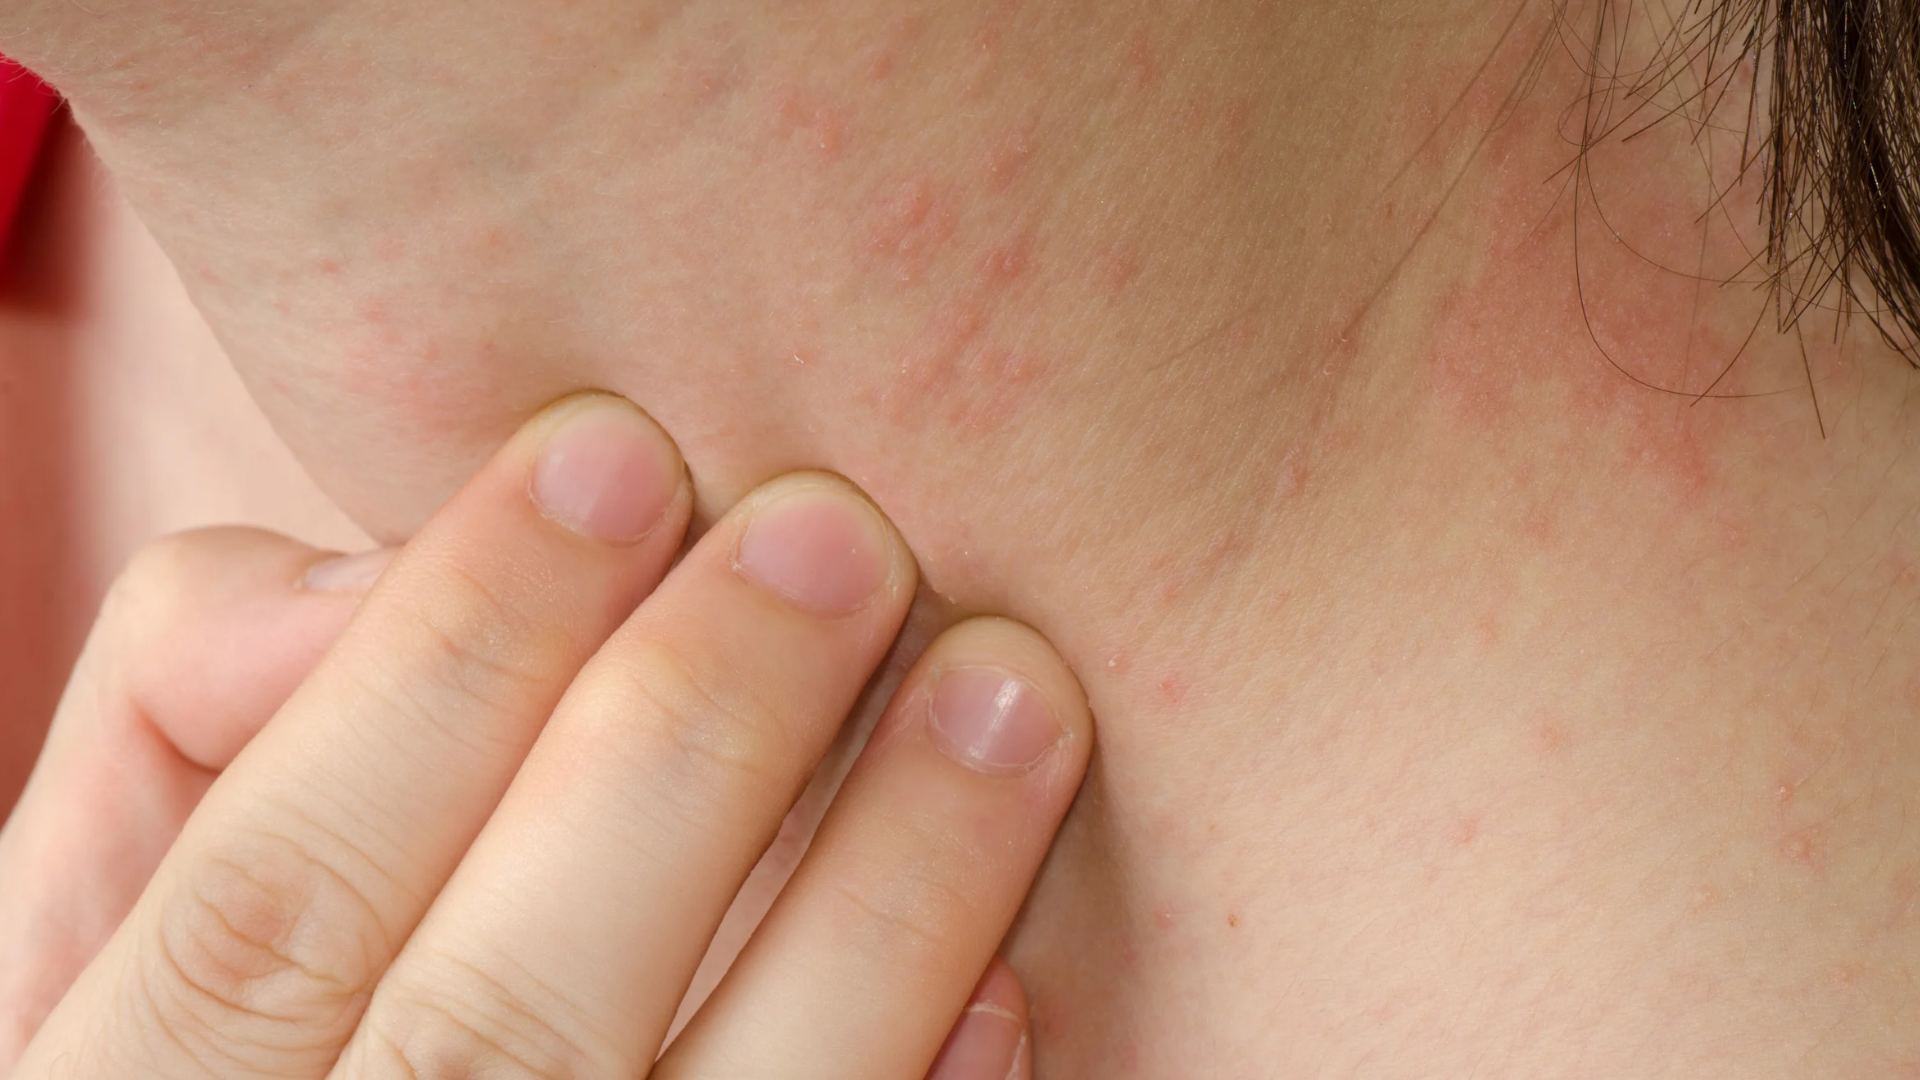 How do antidepressants affect your skin?